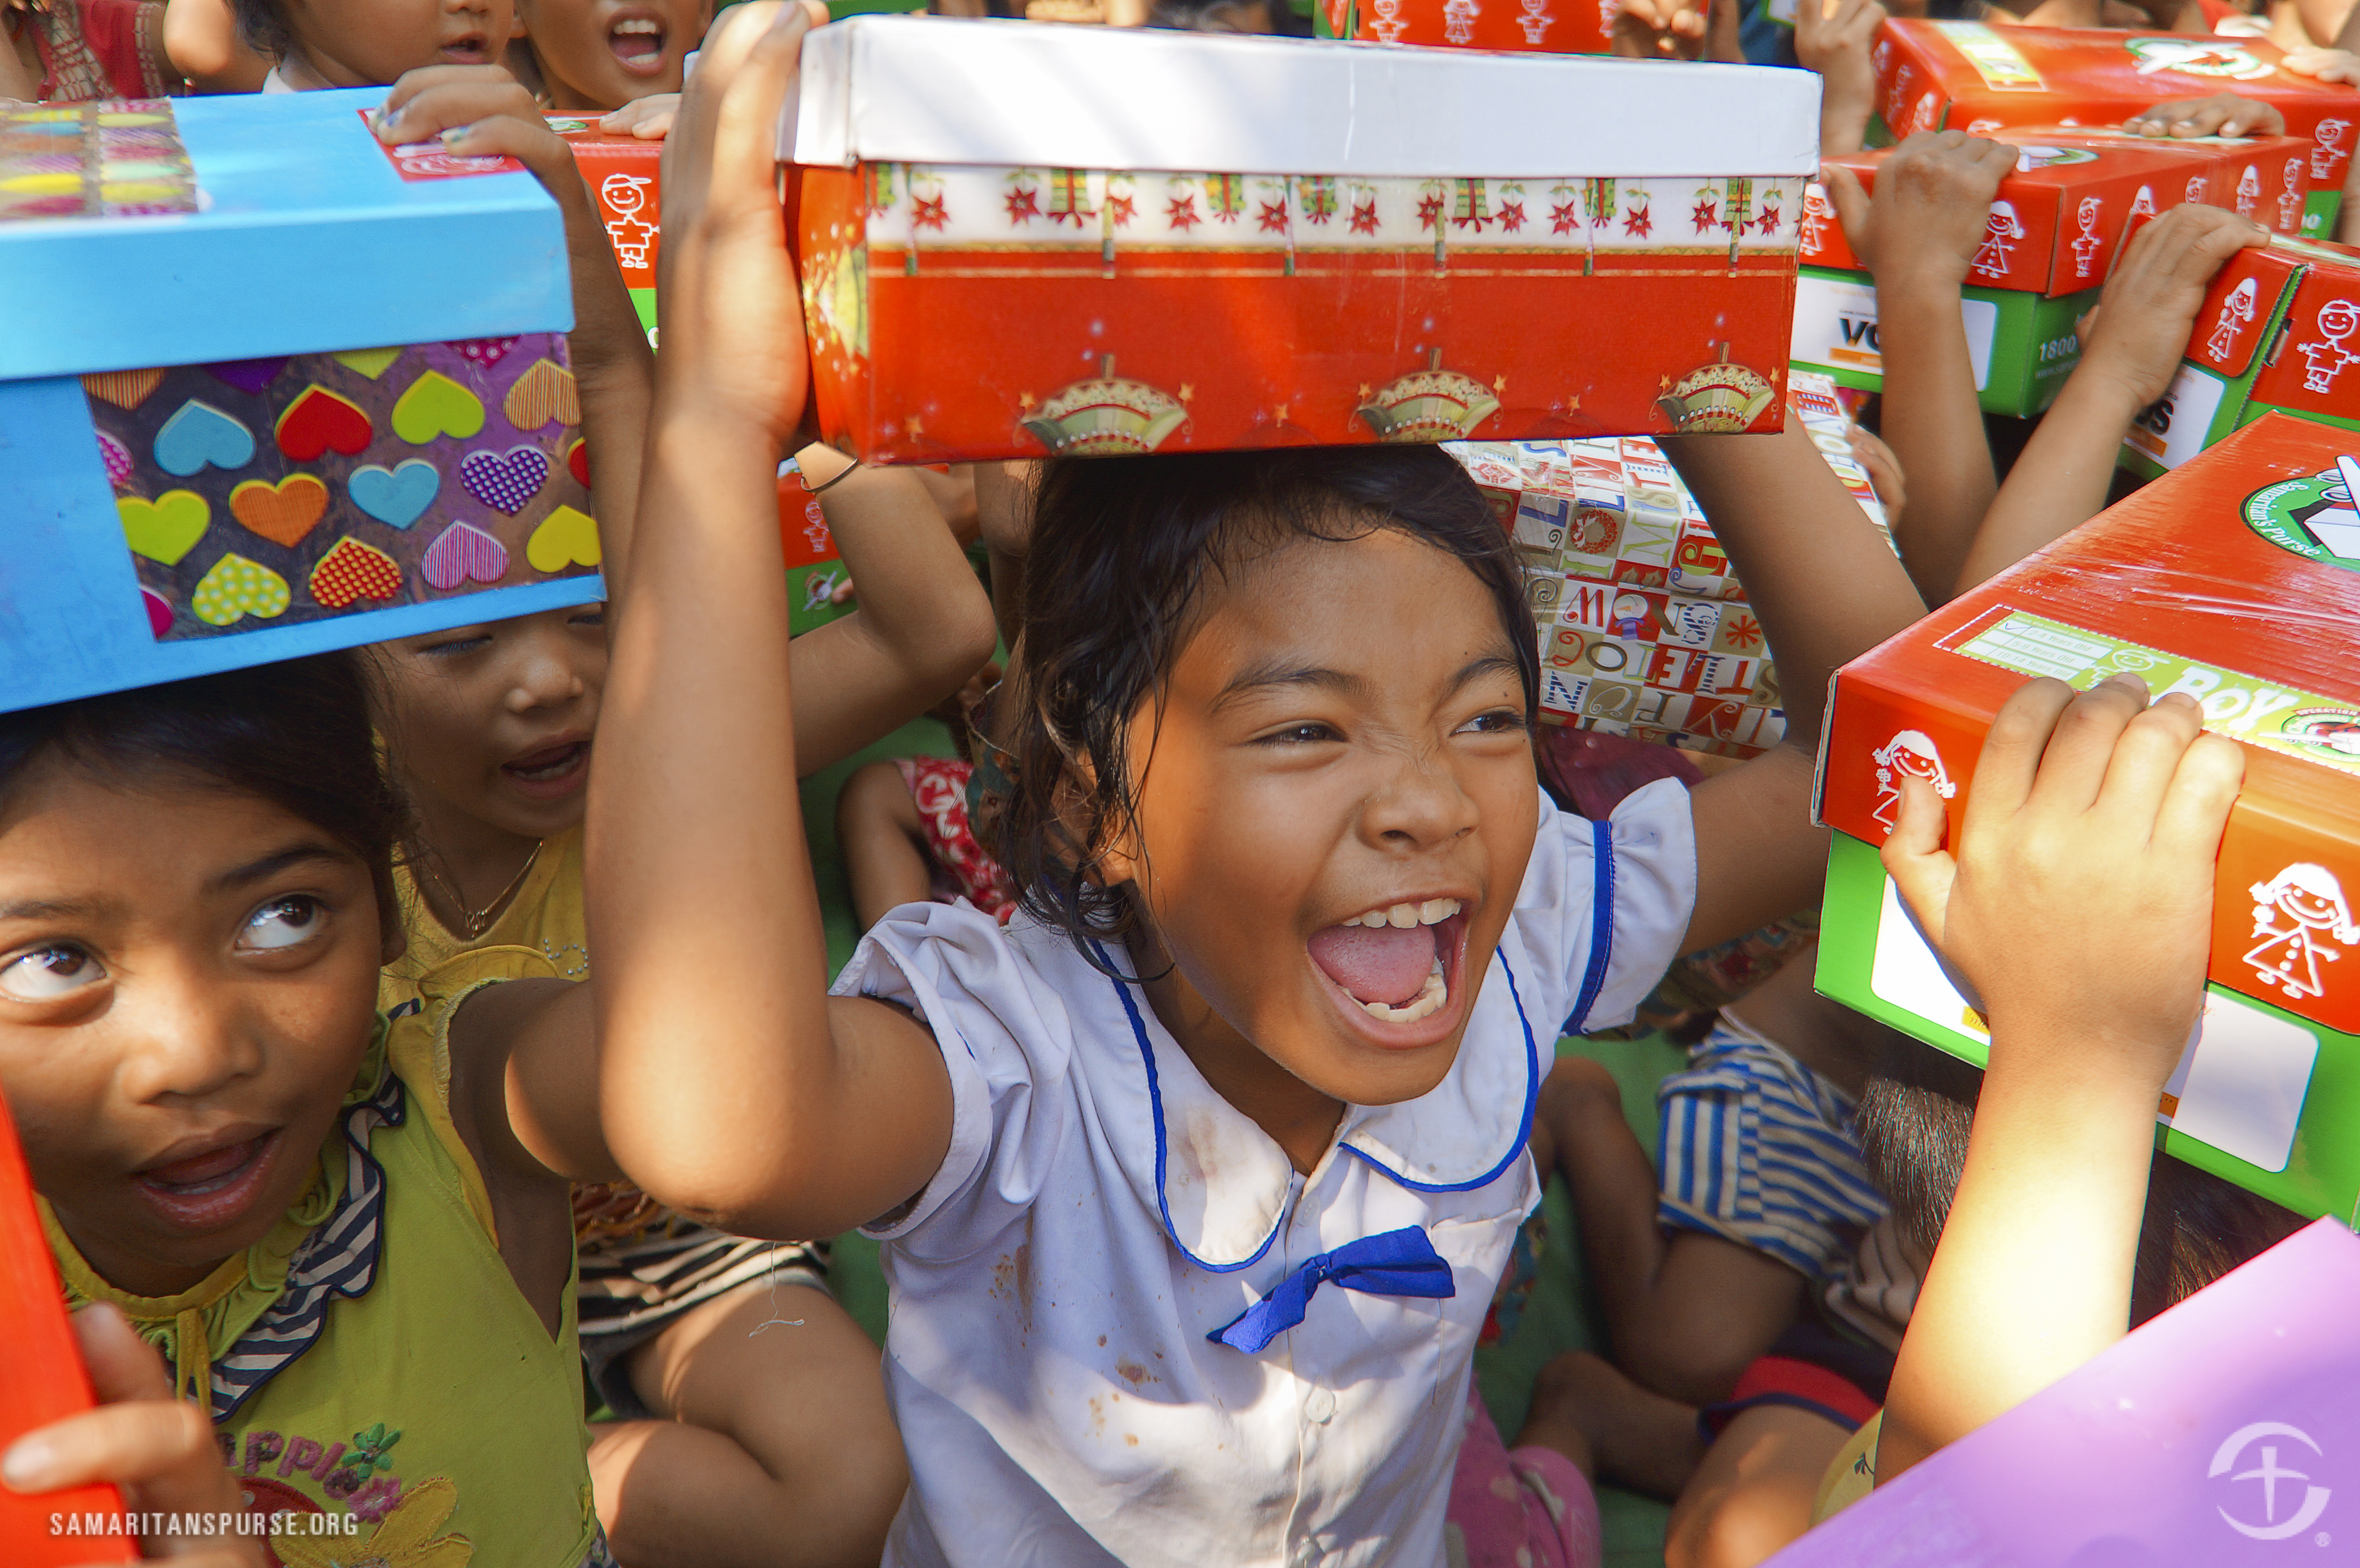 Samaritan's Purse Australia/New Zealand - Next month is OCCtober! Start  packing your Operation Christmas Child shoeboxes now ready for collection  in October! What is your favourite gift to put in a shoebox? @